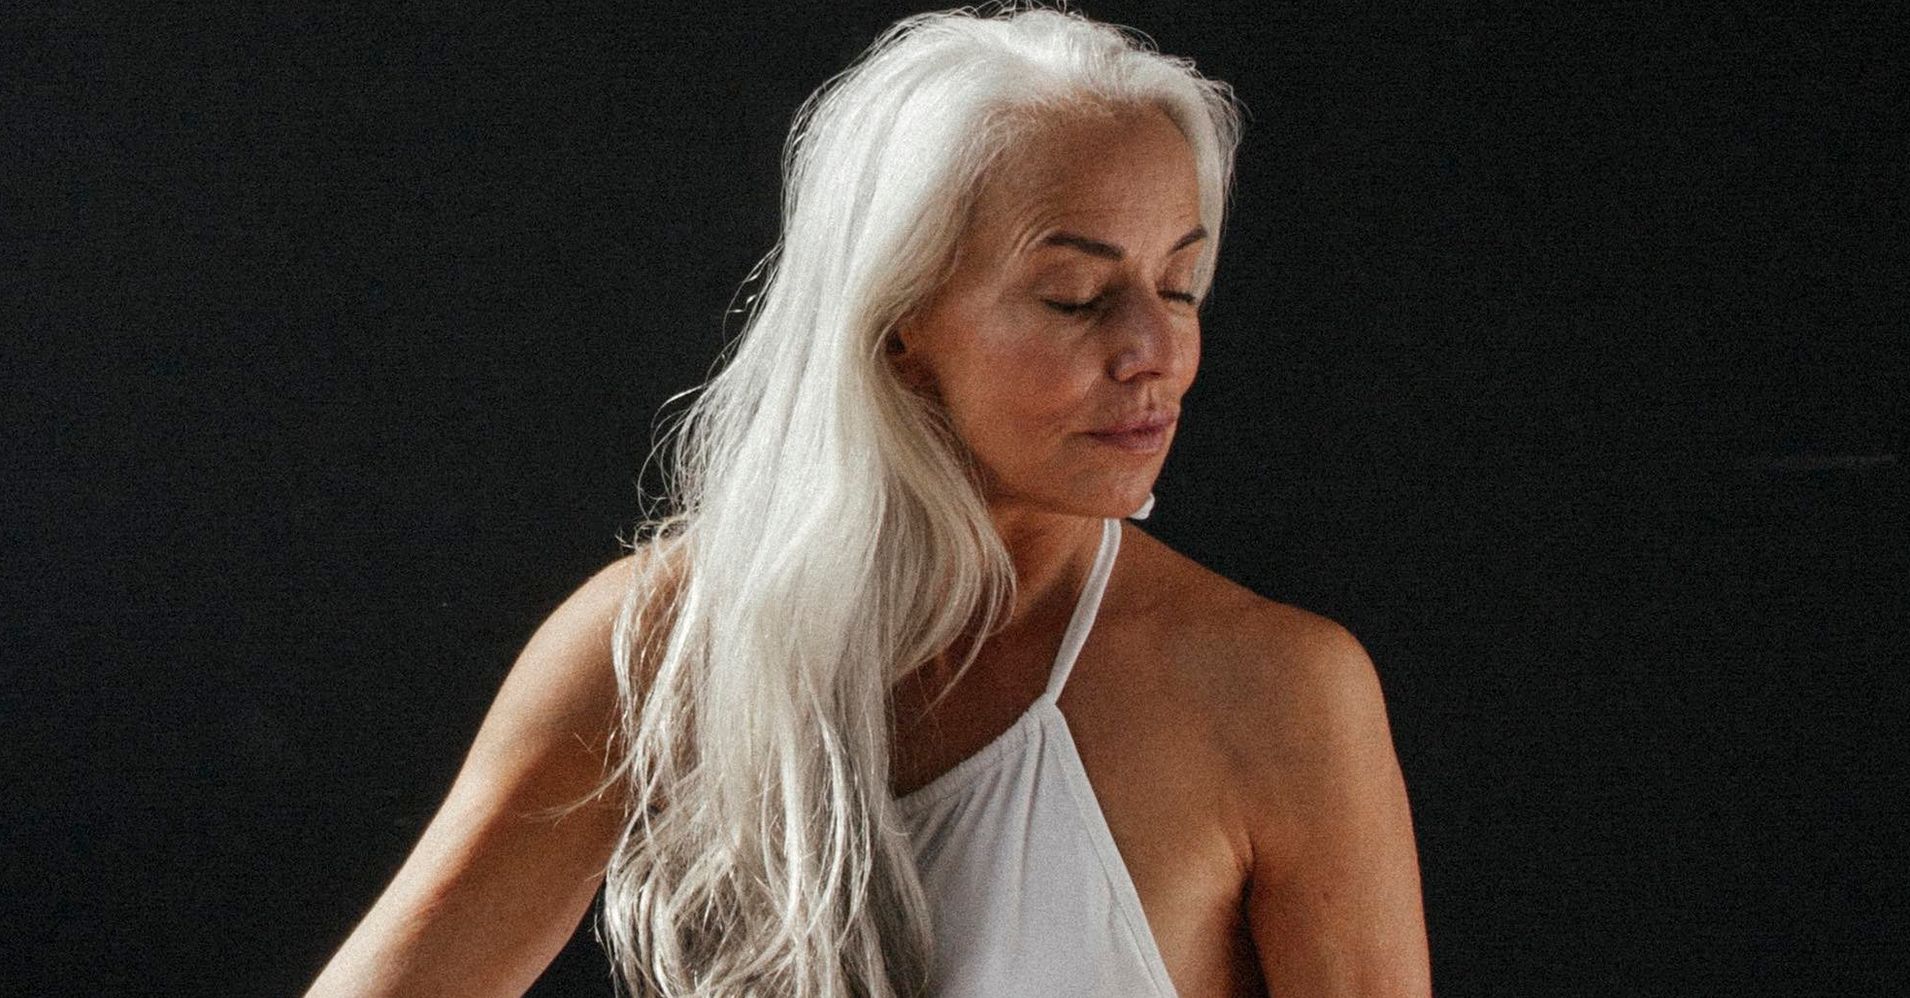 60 Year Old Model Puts Sexed Up Swimsuit Ads To Shame In Stunning Photos Huffpost